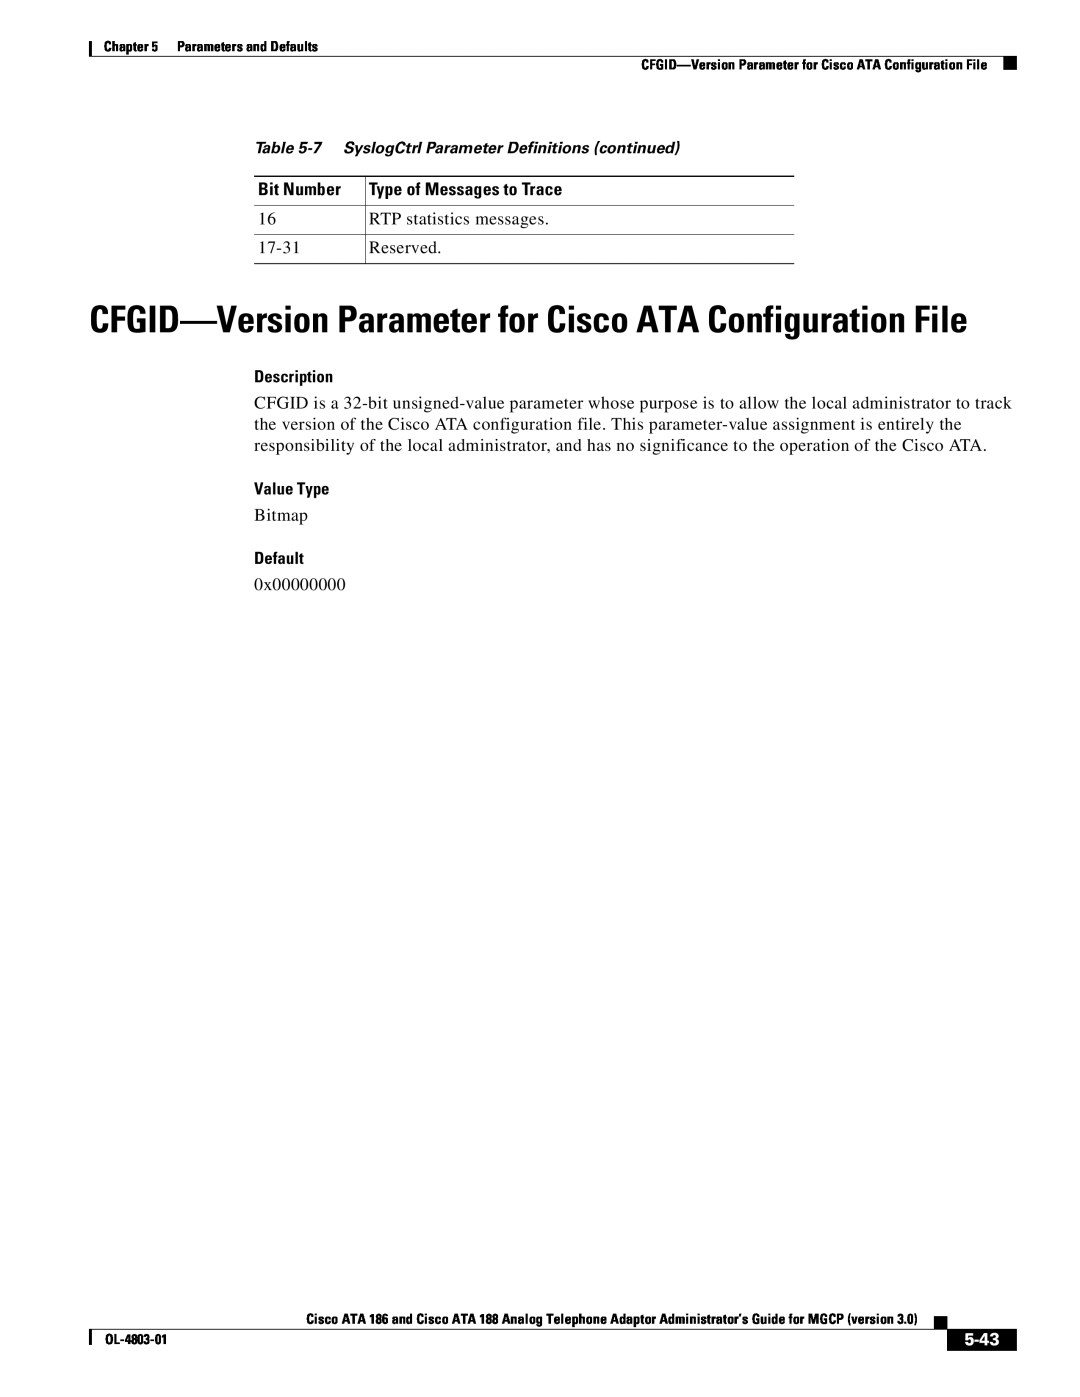 Cisco Systems ATA 186 CFGID-Version Parameter for Cisco ATA Configuration File, Bit Number Type of Messages to Trace, 5-43 